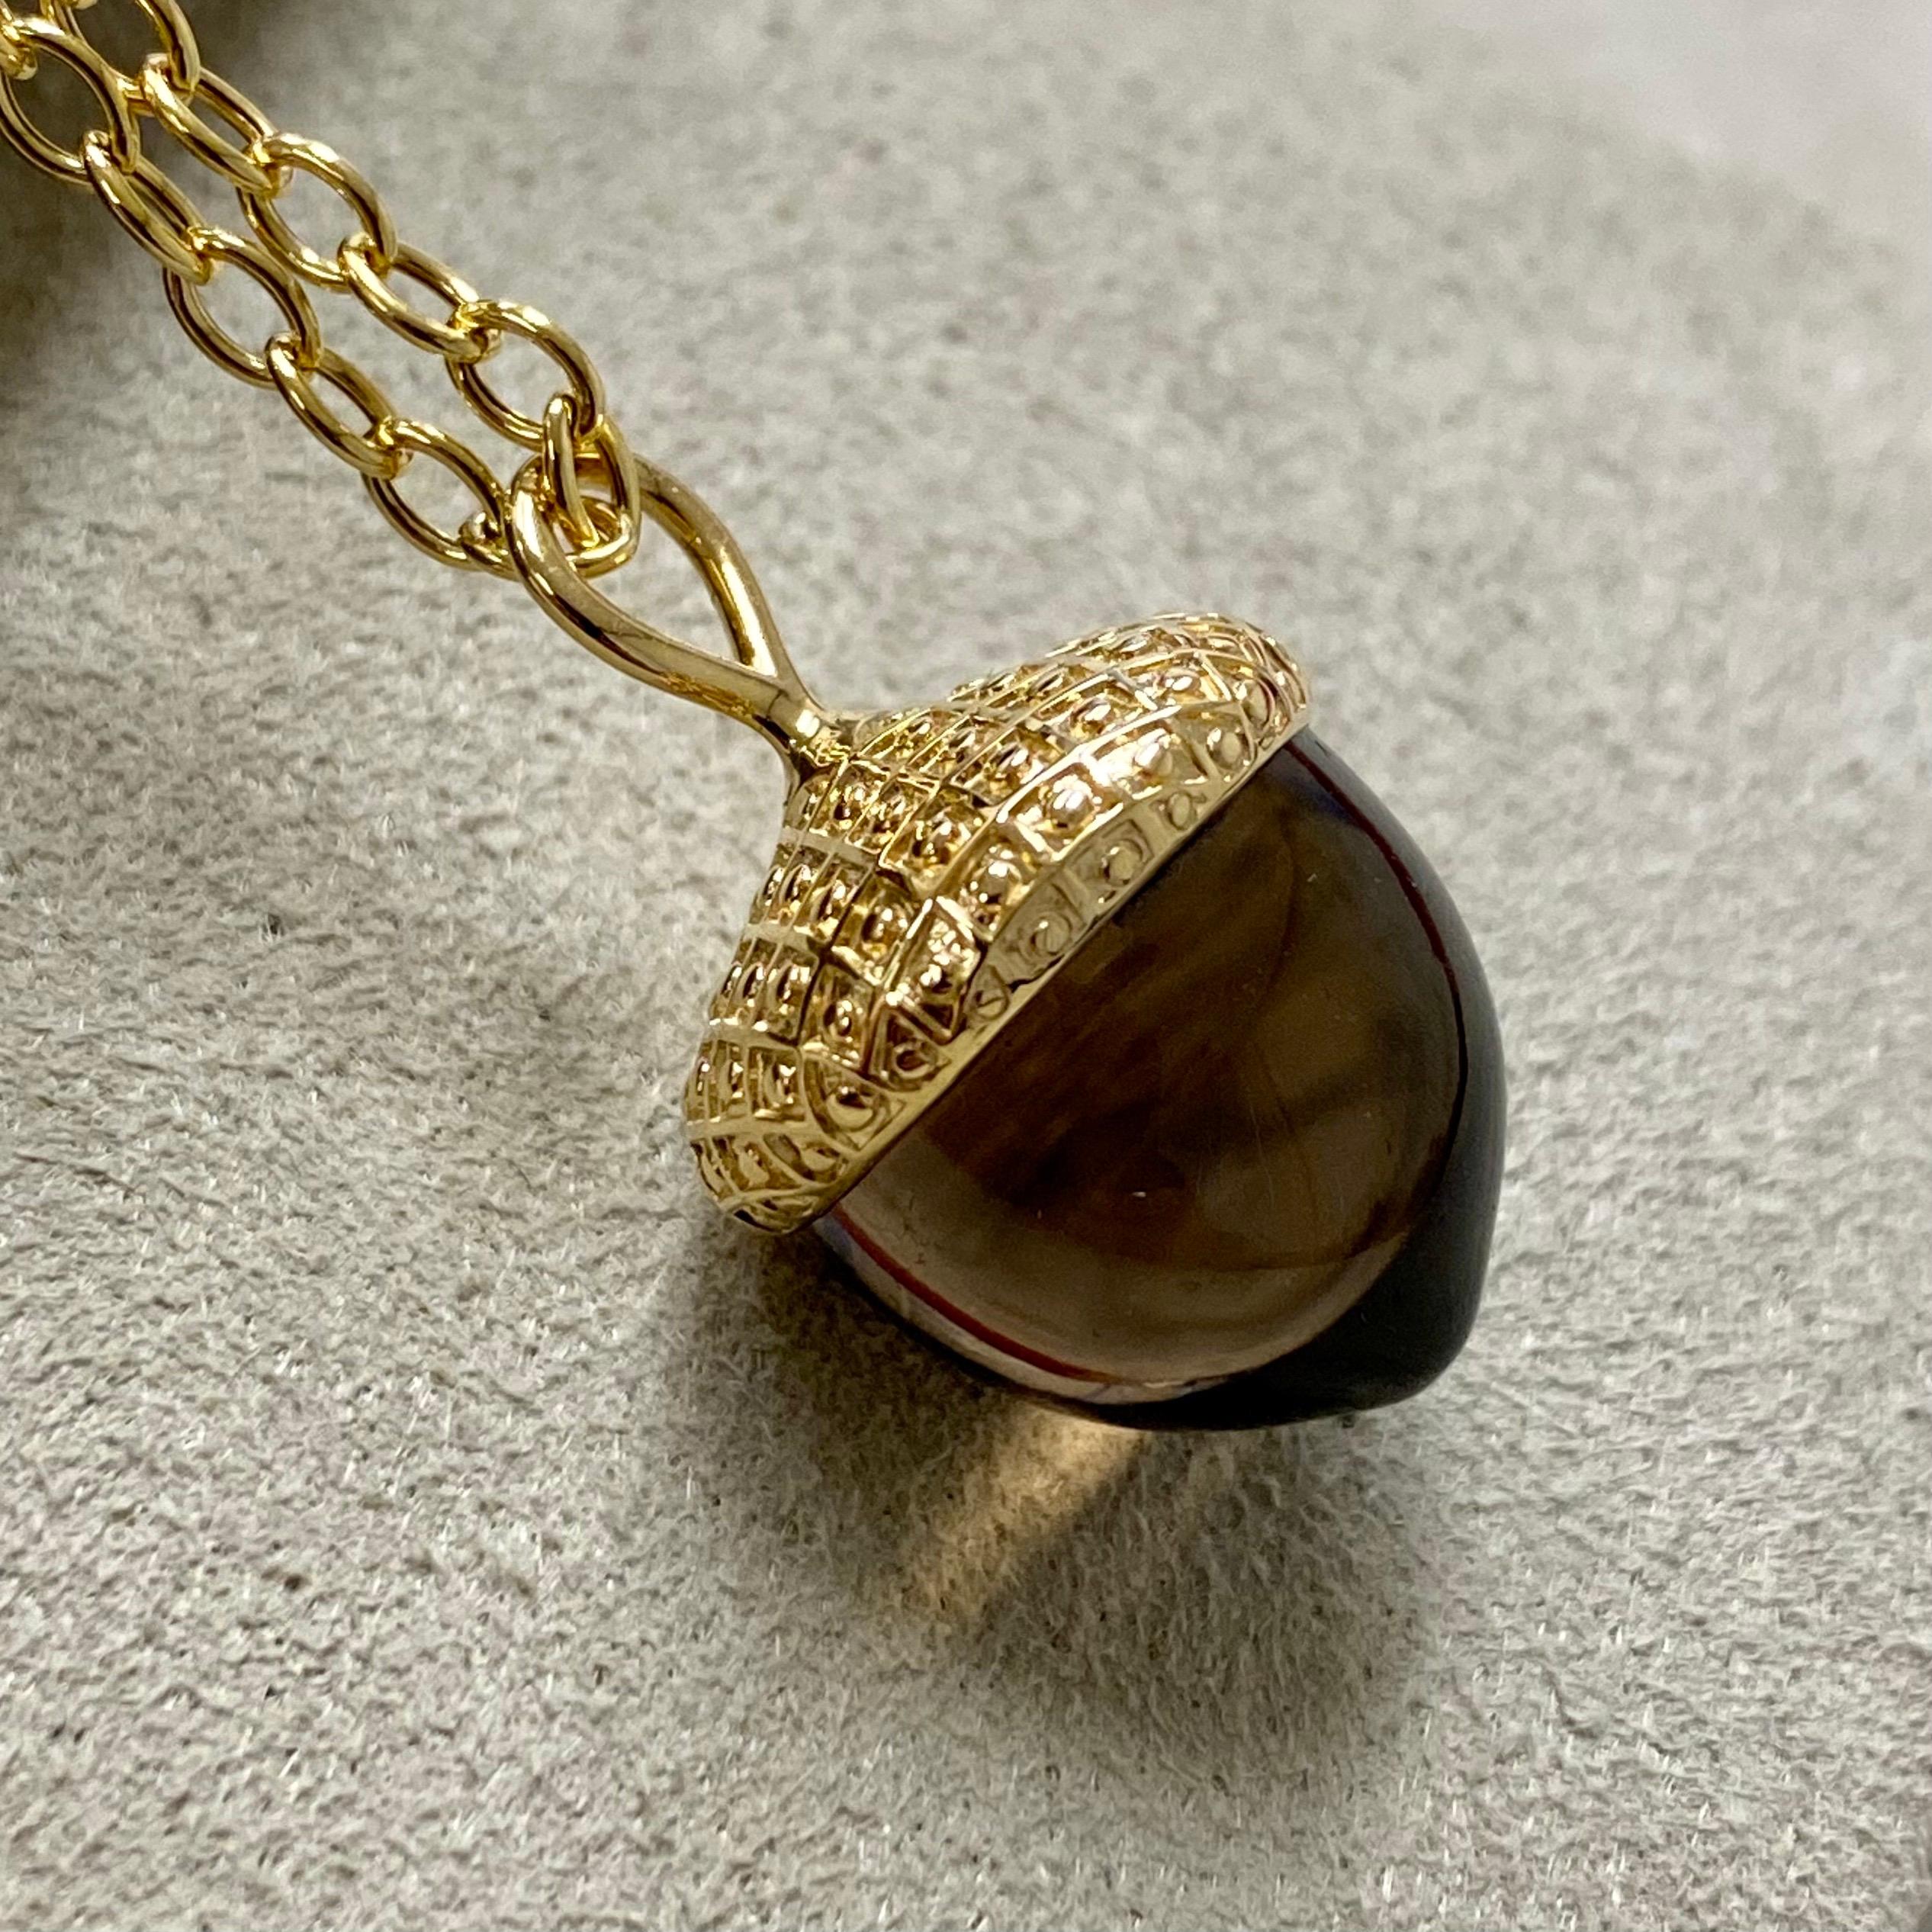 Created in 18 karat yellow gold 
Smoky Quartz 19 carats approx.
Chain sold separately


About the Designers ~ Dharmesh & Namrata

Drawing inspiration from little things, Dharmesh & Namrata Kothari have created an extraordinary and refreshing